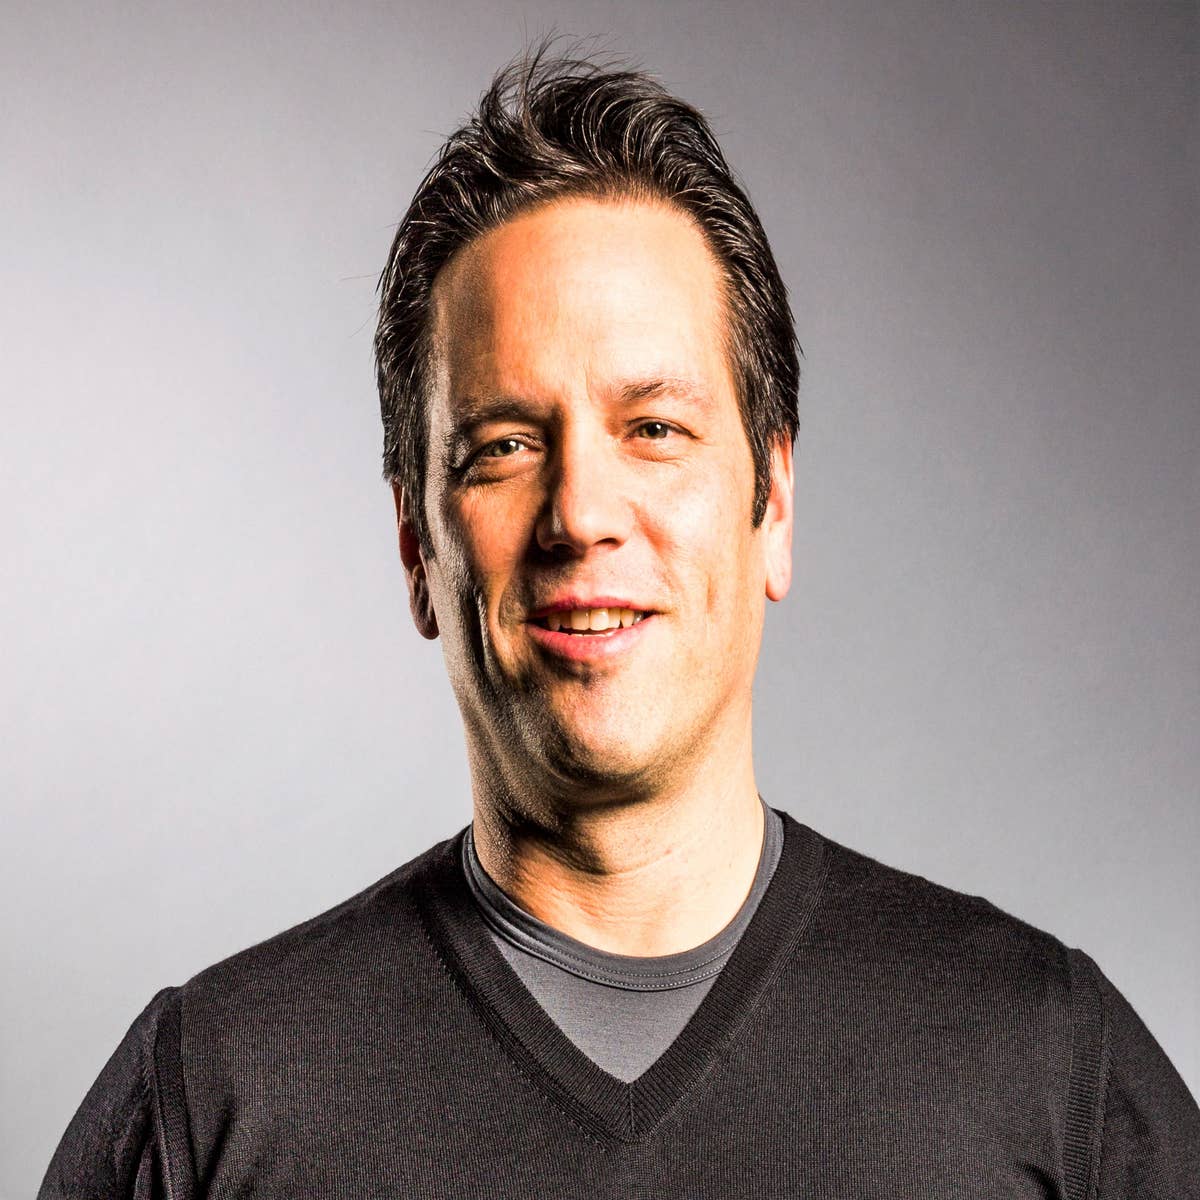 Are you as excited as Phil Spencer for the future of Xbox games